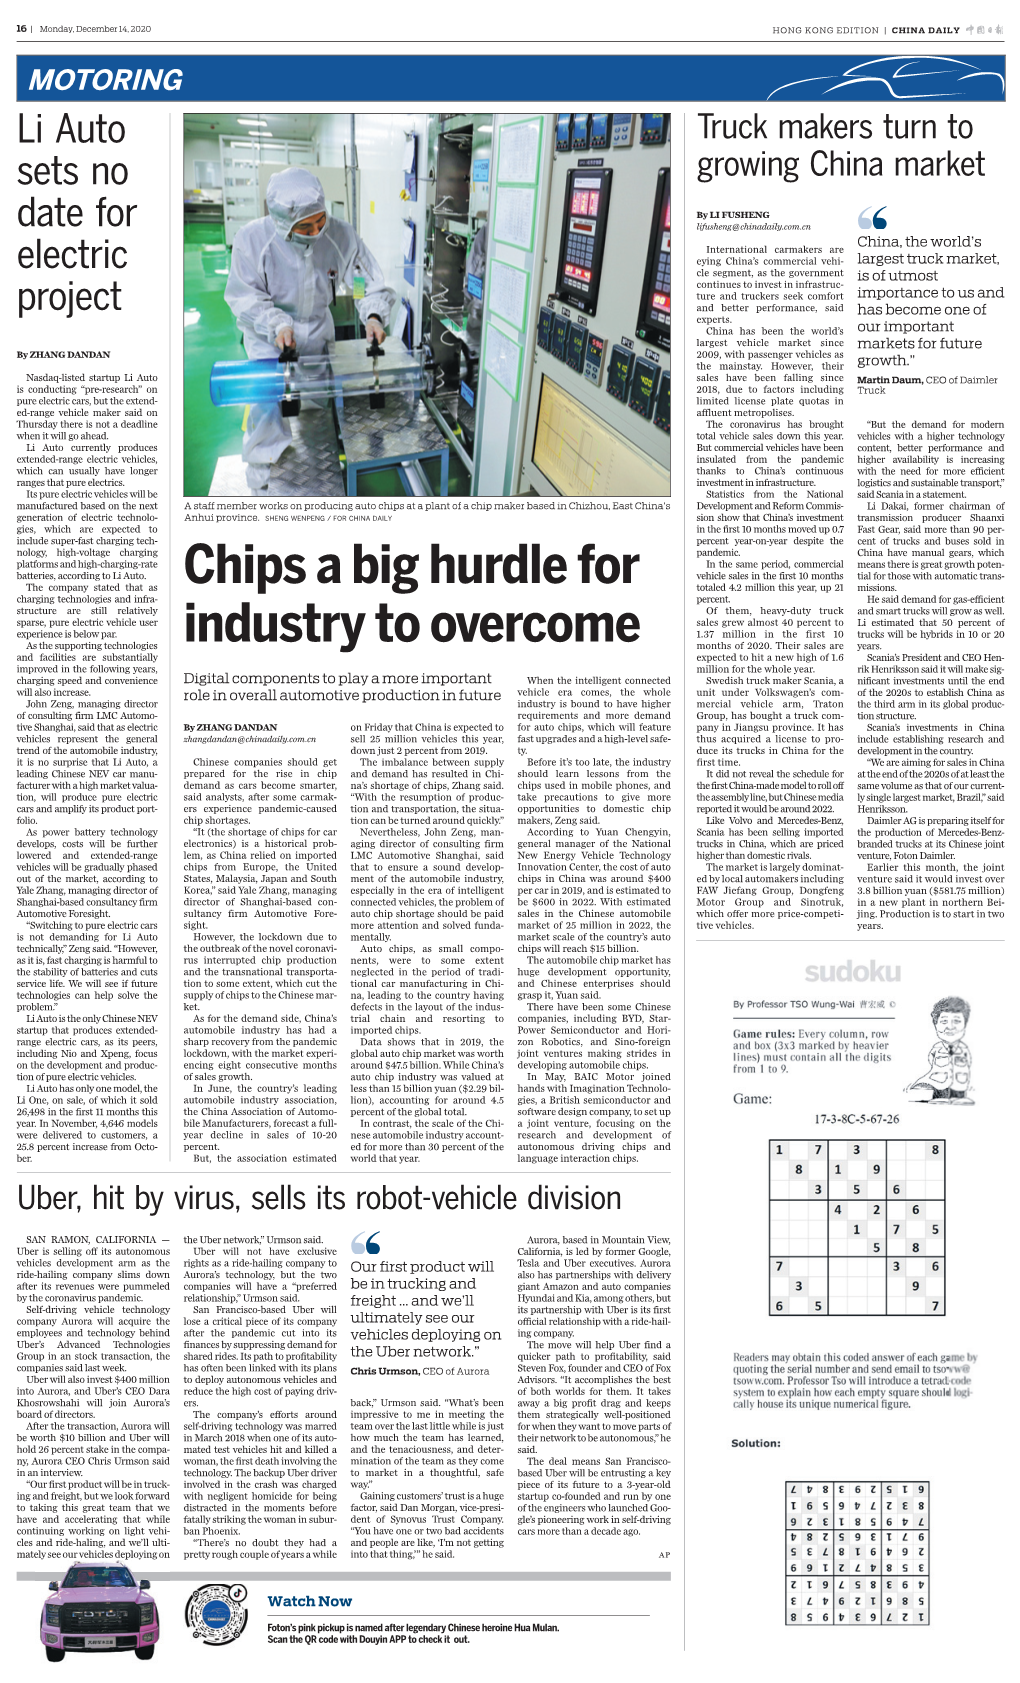 Chips a Big Hurdle for Industry to Overcome